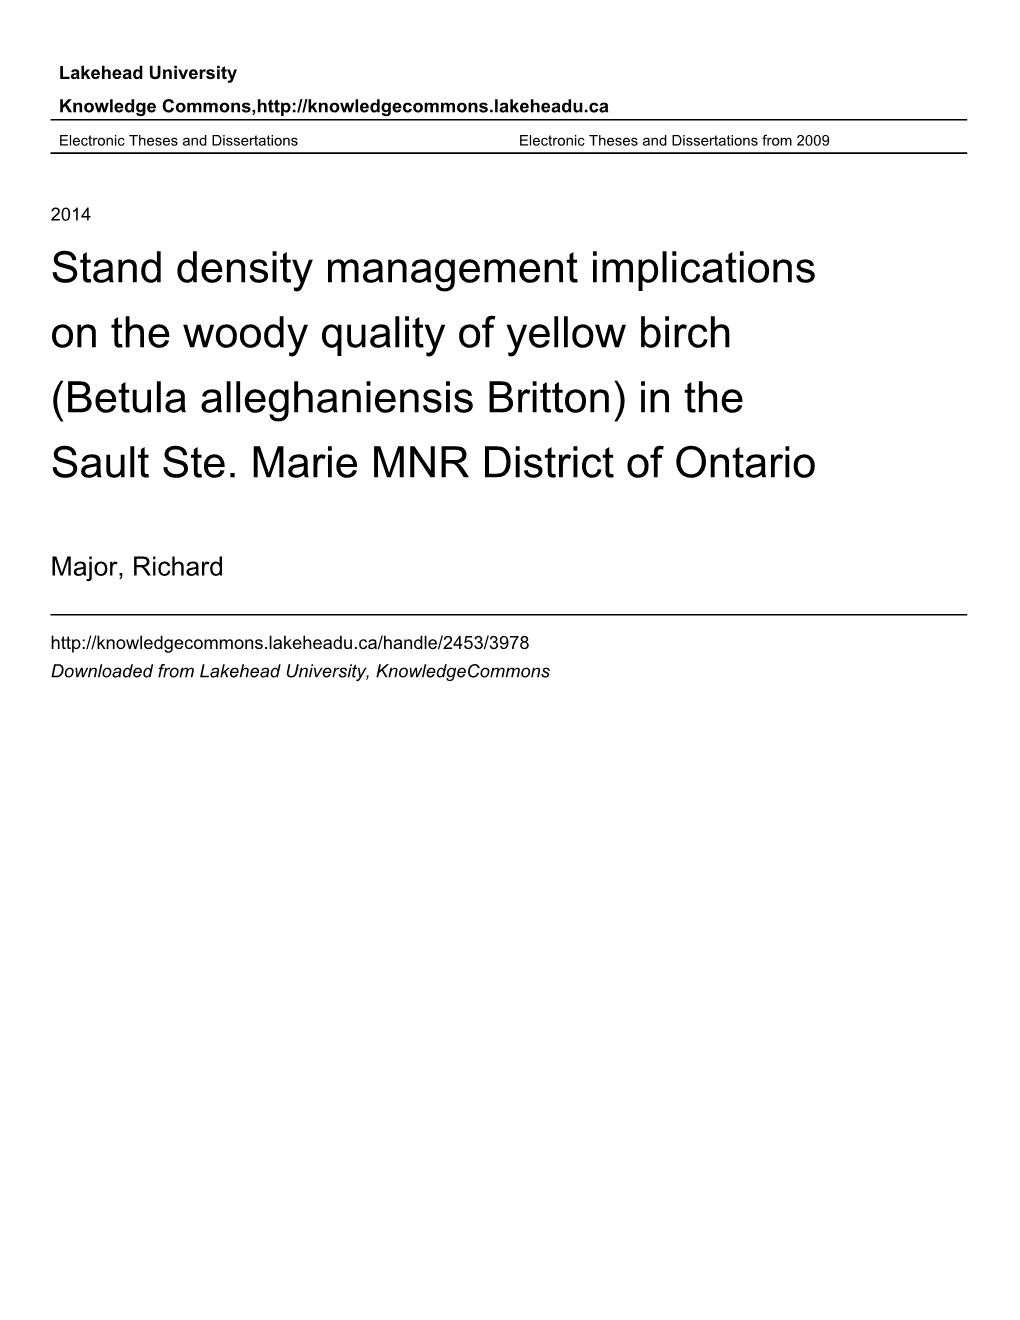 Stand Density Management Implications on the Woody Quality of Yellow Birch (Betula Alleghaniensis Britton) in the Sault Ste